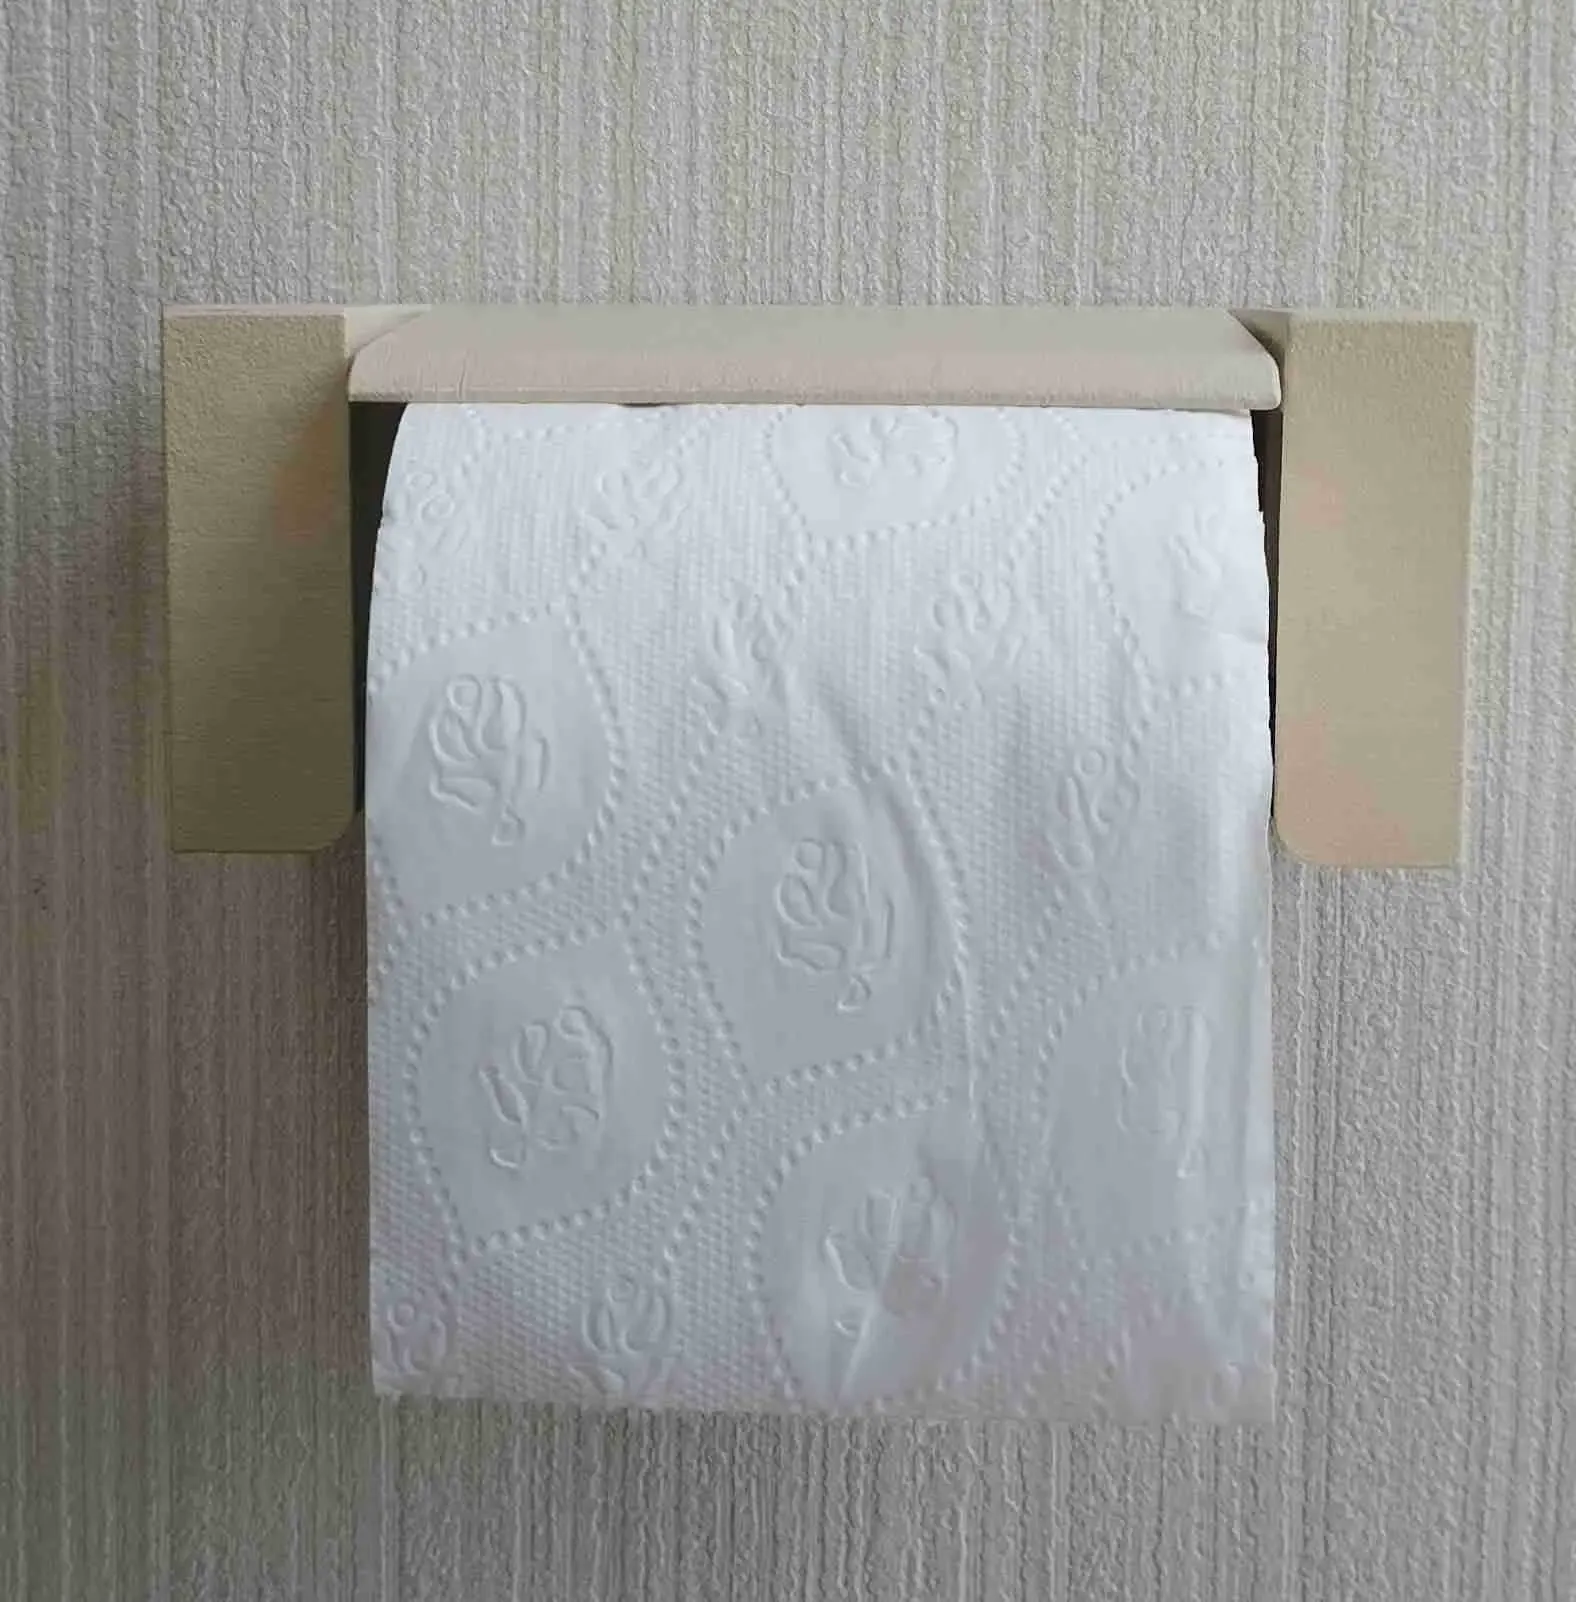 Yet Another Quick Change Toilet Paper Roll Holder - Hood